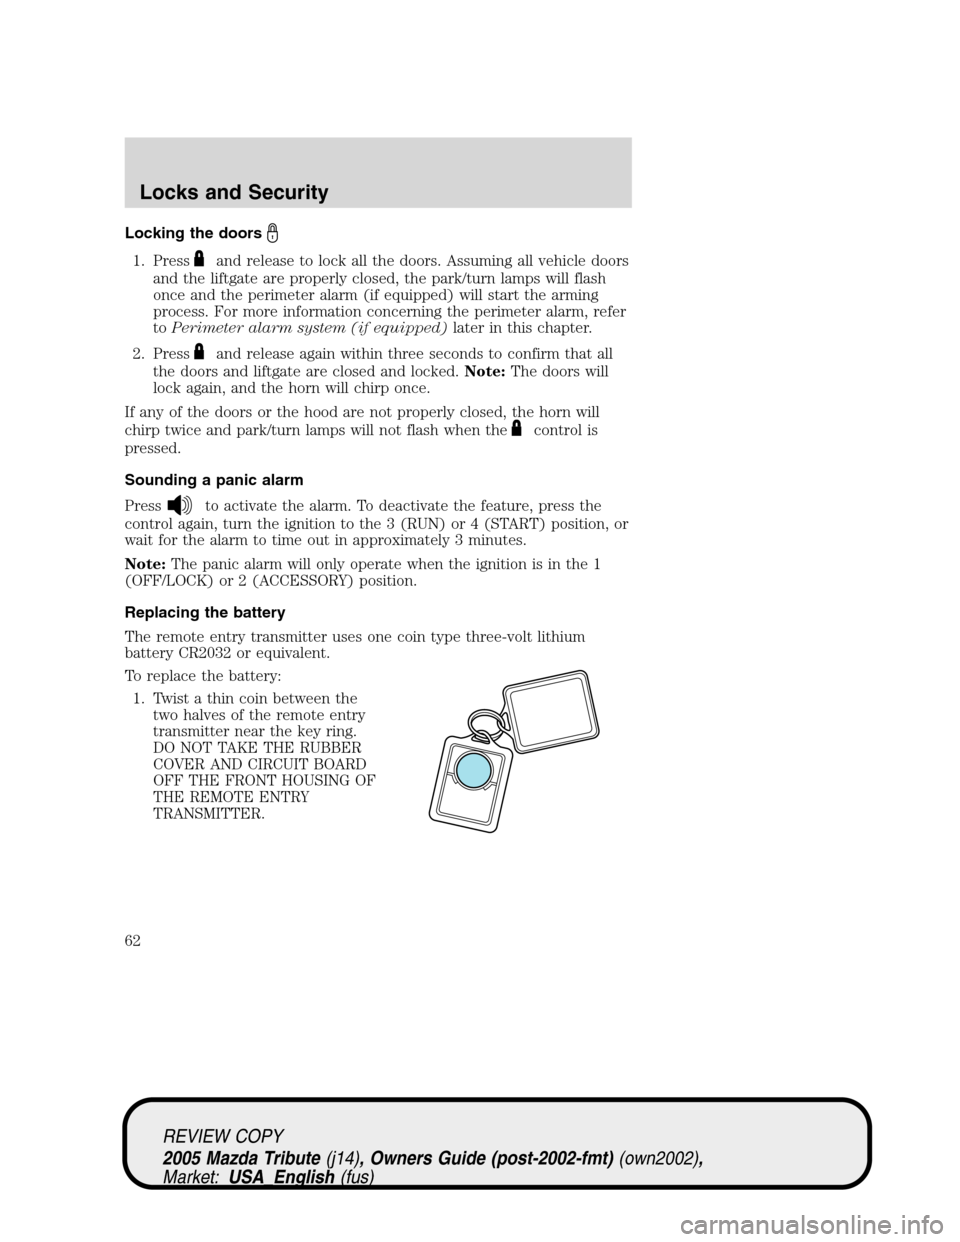 MAZDA MODEL TRIBUTE 2005  Owners Manual (in English) Locking the doors
1. Pressand release to lock all the doors. Assuming all vehicle doors
and the liftgate are properly closed, the park/turn lamps will flash
once and the perimeter alarm (if equipped) 